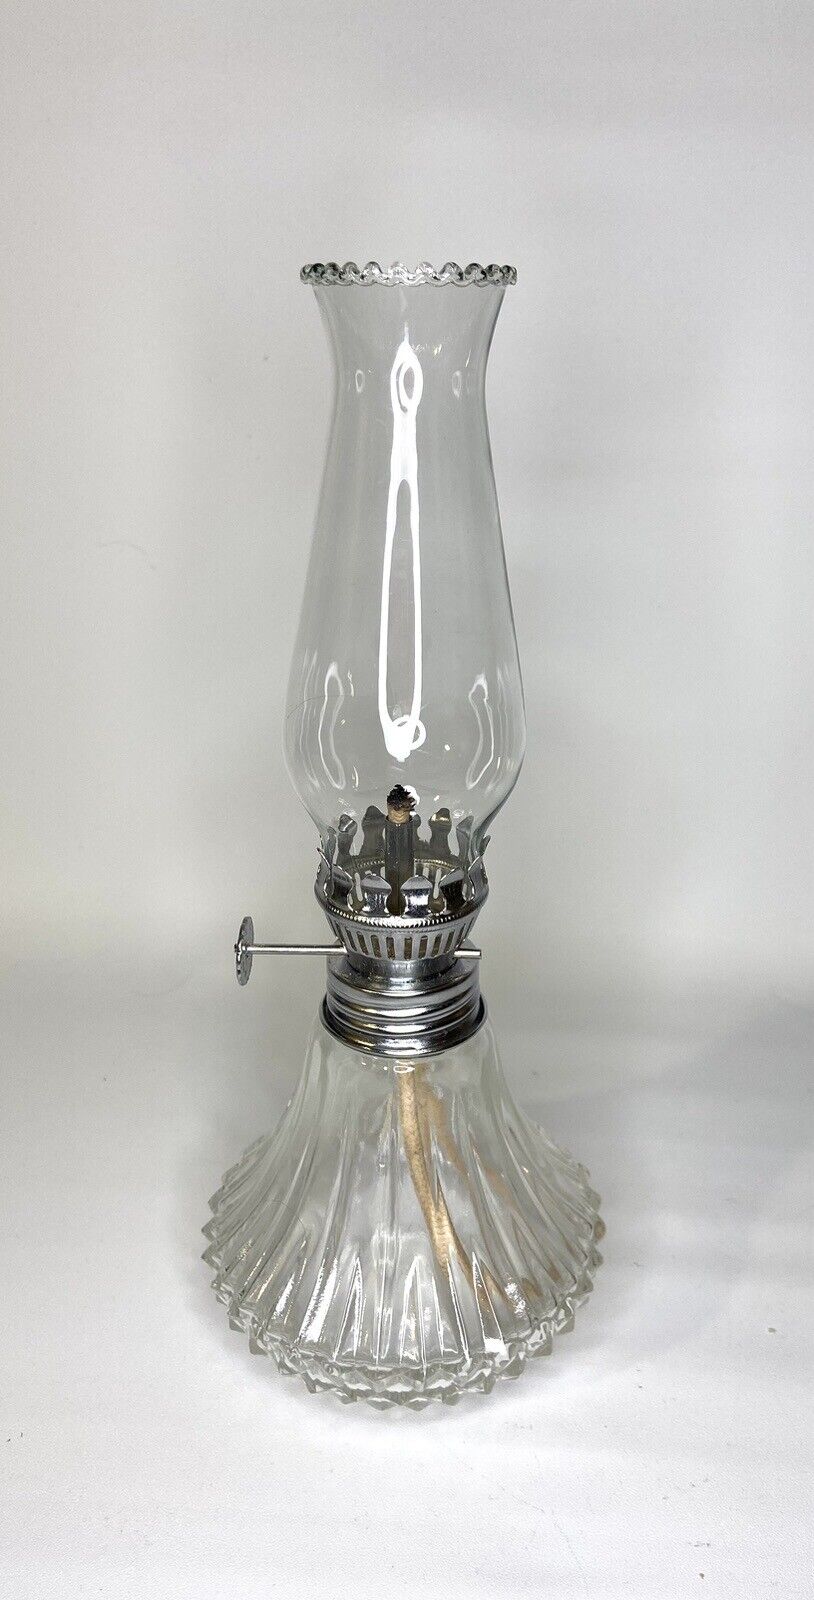 Vintage Faceted Lamplight Farms Glass Chimney Oil Lamp 9” Tall.